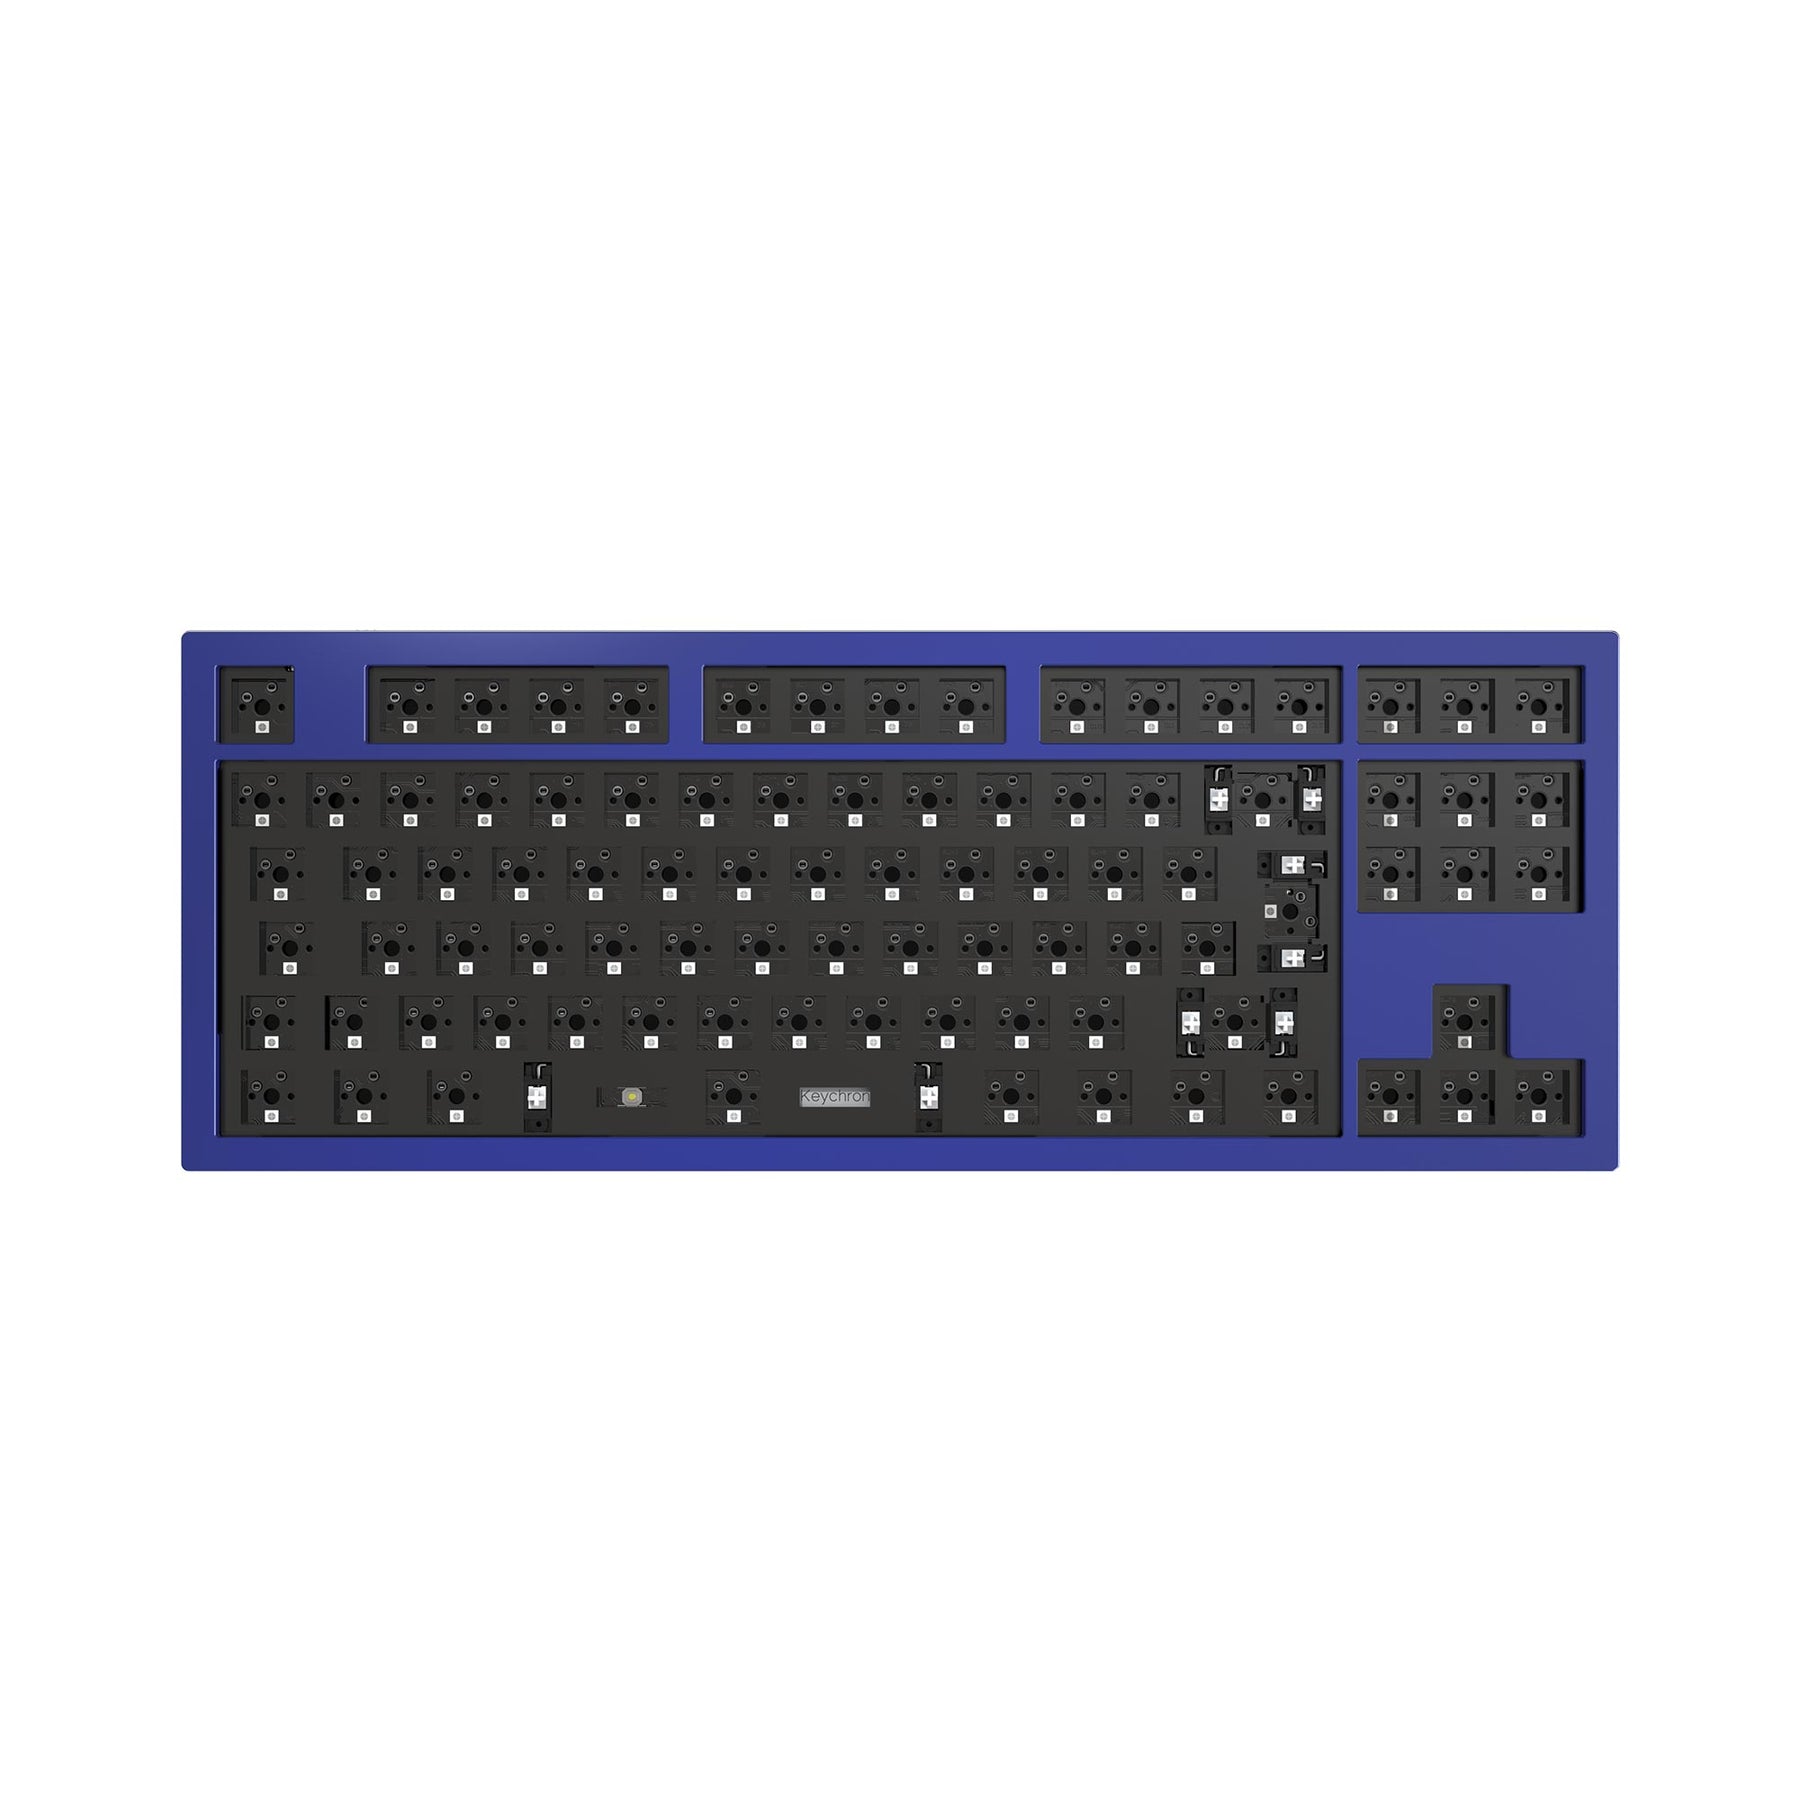 Spanish Layout OEM Keycaps European Type ANSI ISO-ES PBT Material for  Cherry MX Switches Fit Mechanical Keyboards – GREATWALL EBUY CO., LIMITED